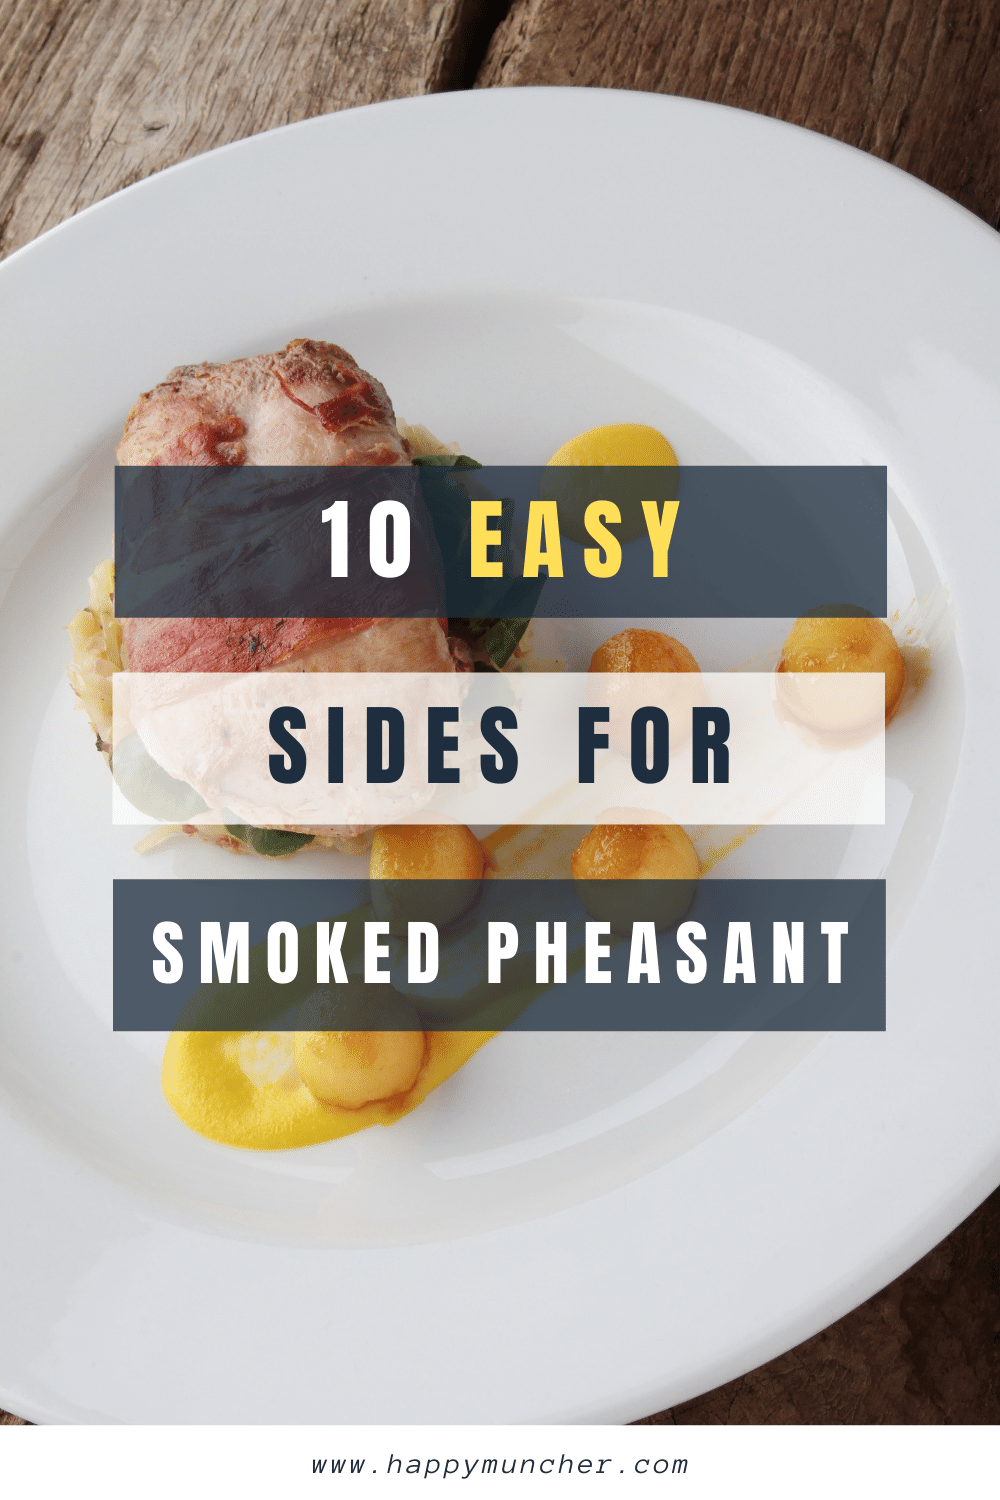 What to Serve with Smoked Pheasant (10 Easy Sides) – Happy Muncher